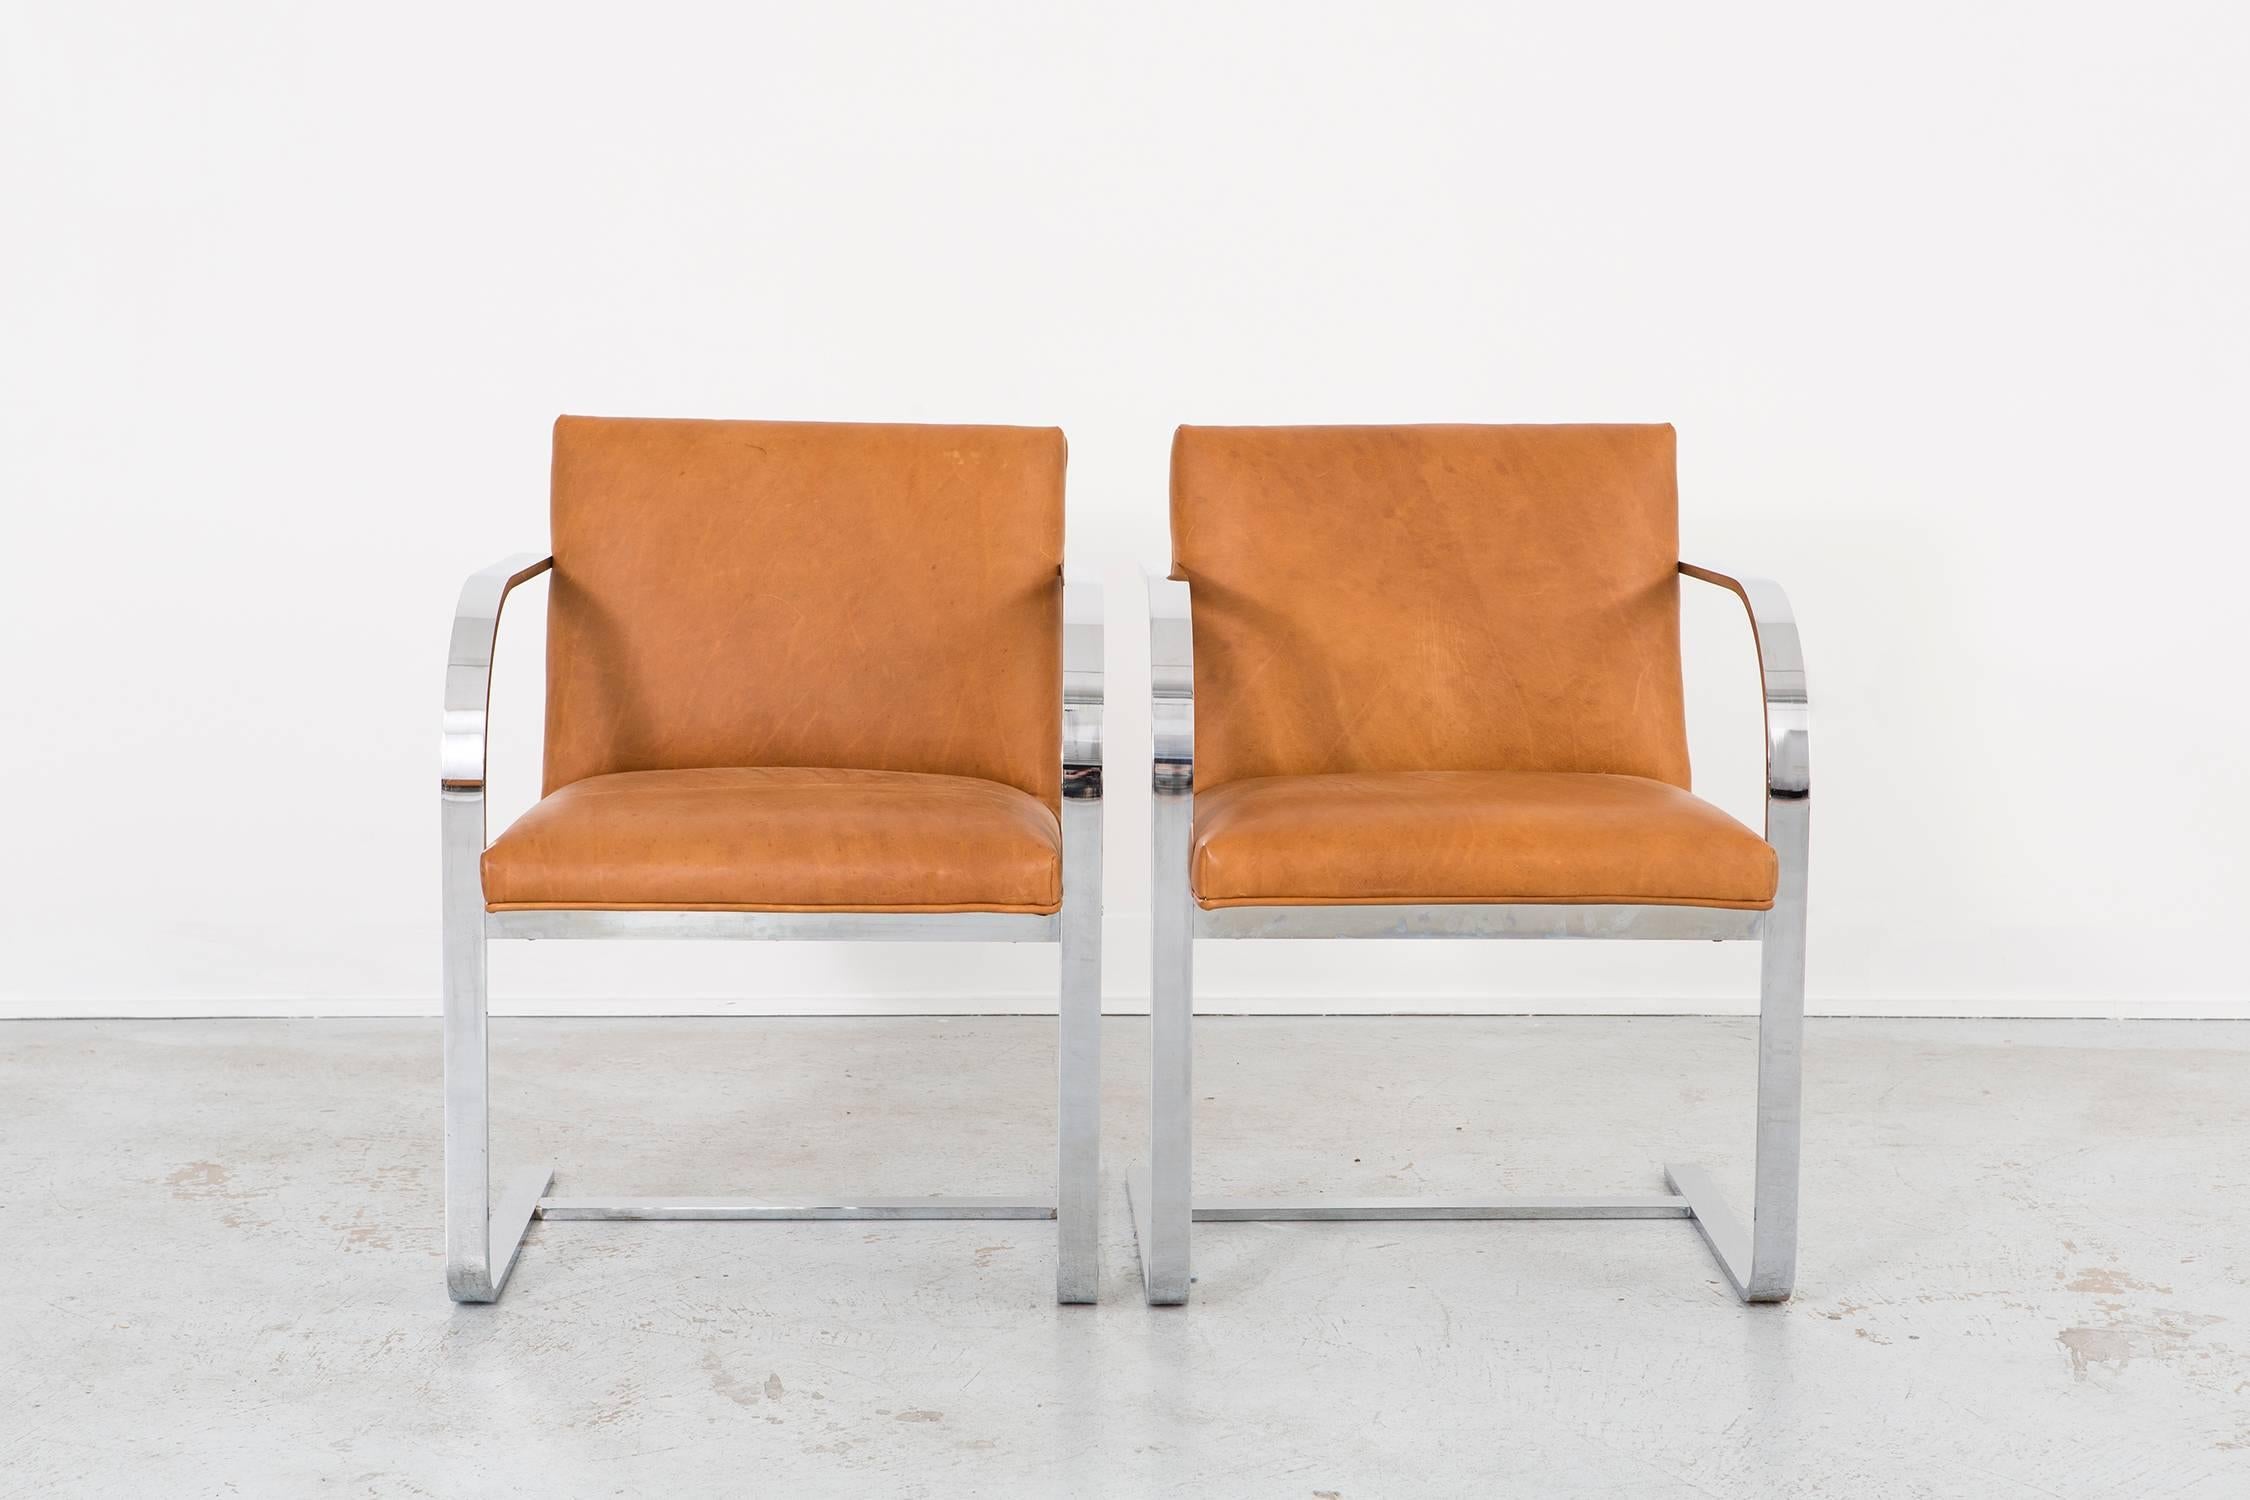 set of four cantilever dining chairs

designed by Thonet

USA, circa 1960s

reupholstered in full grain pull-up leather with fabulous patina and full of natural characteristics and chrome

30 ¼” H x 23” W x 24 ½” D x seat 18 ¾” H

pull-up leather is